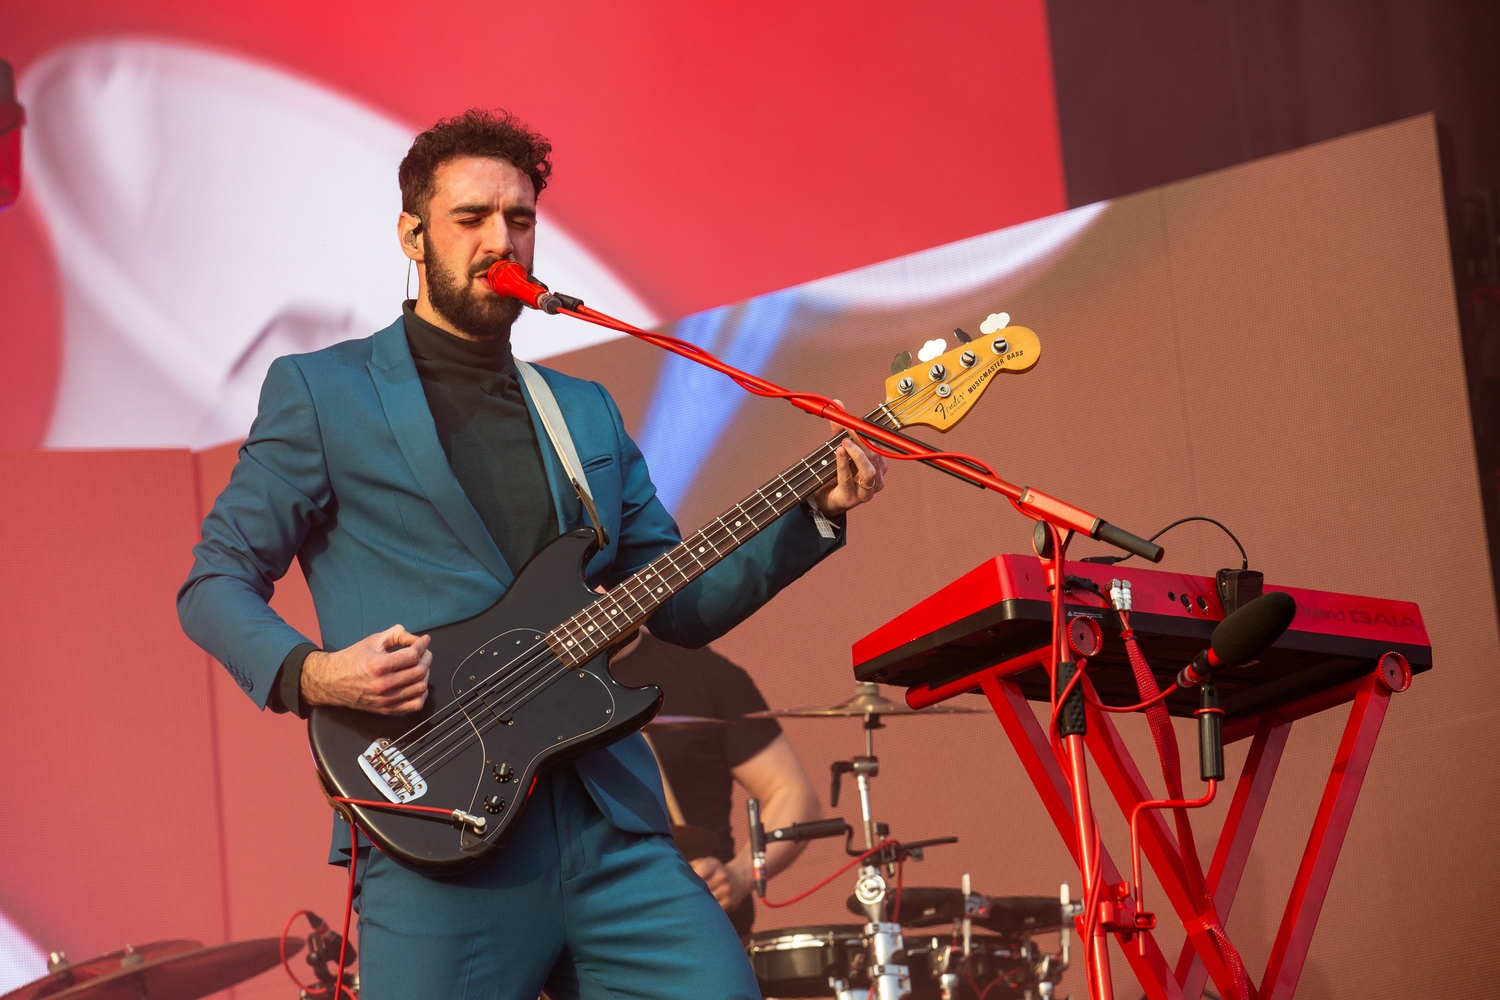 The best of the rest on Friday of Glastonbury 2019